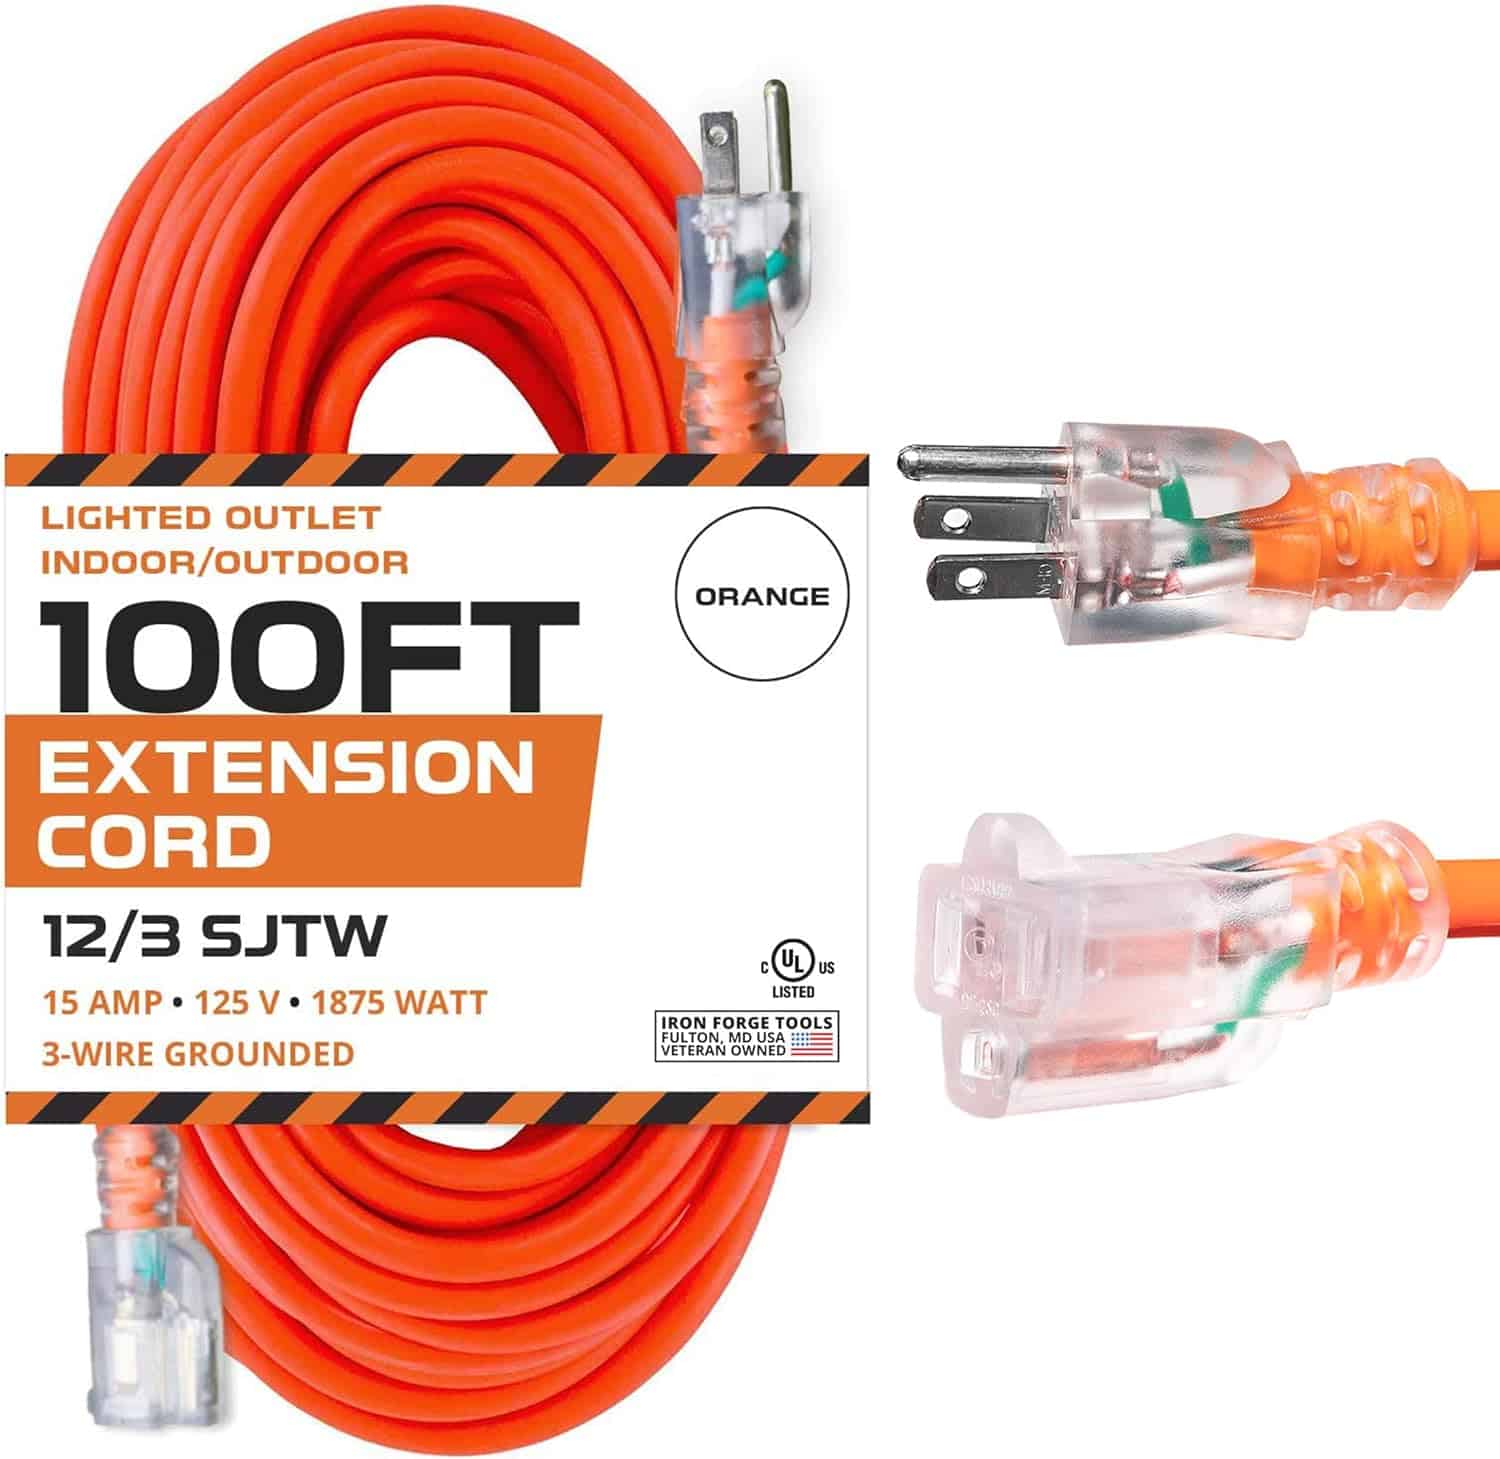 Iron Forge 12 Gauge Outdoor Extension Cord 100 Ft with Lighted End12 3 Heavy Duty Extension Cable with 3 Prong Grounded Plug SJTW Weatherproof Long 1